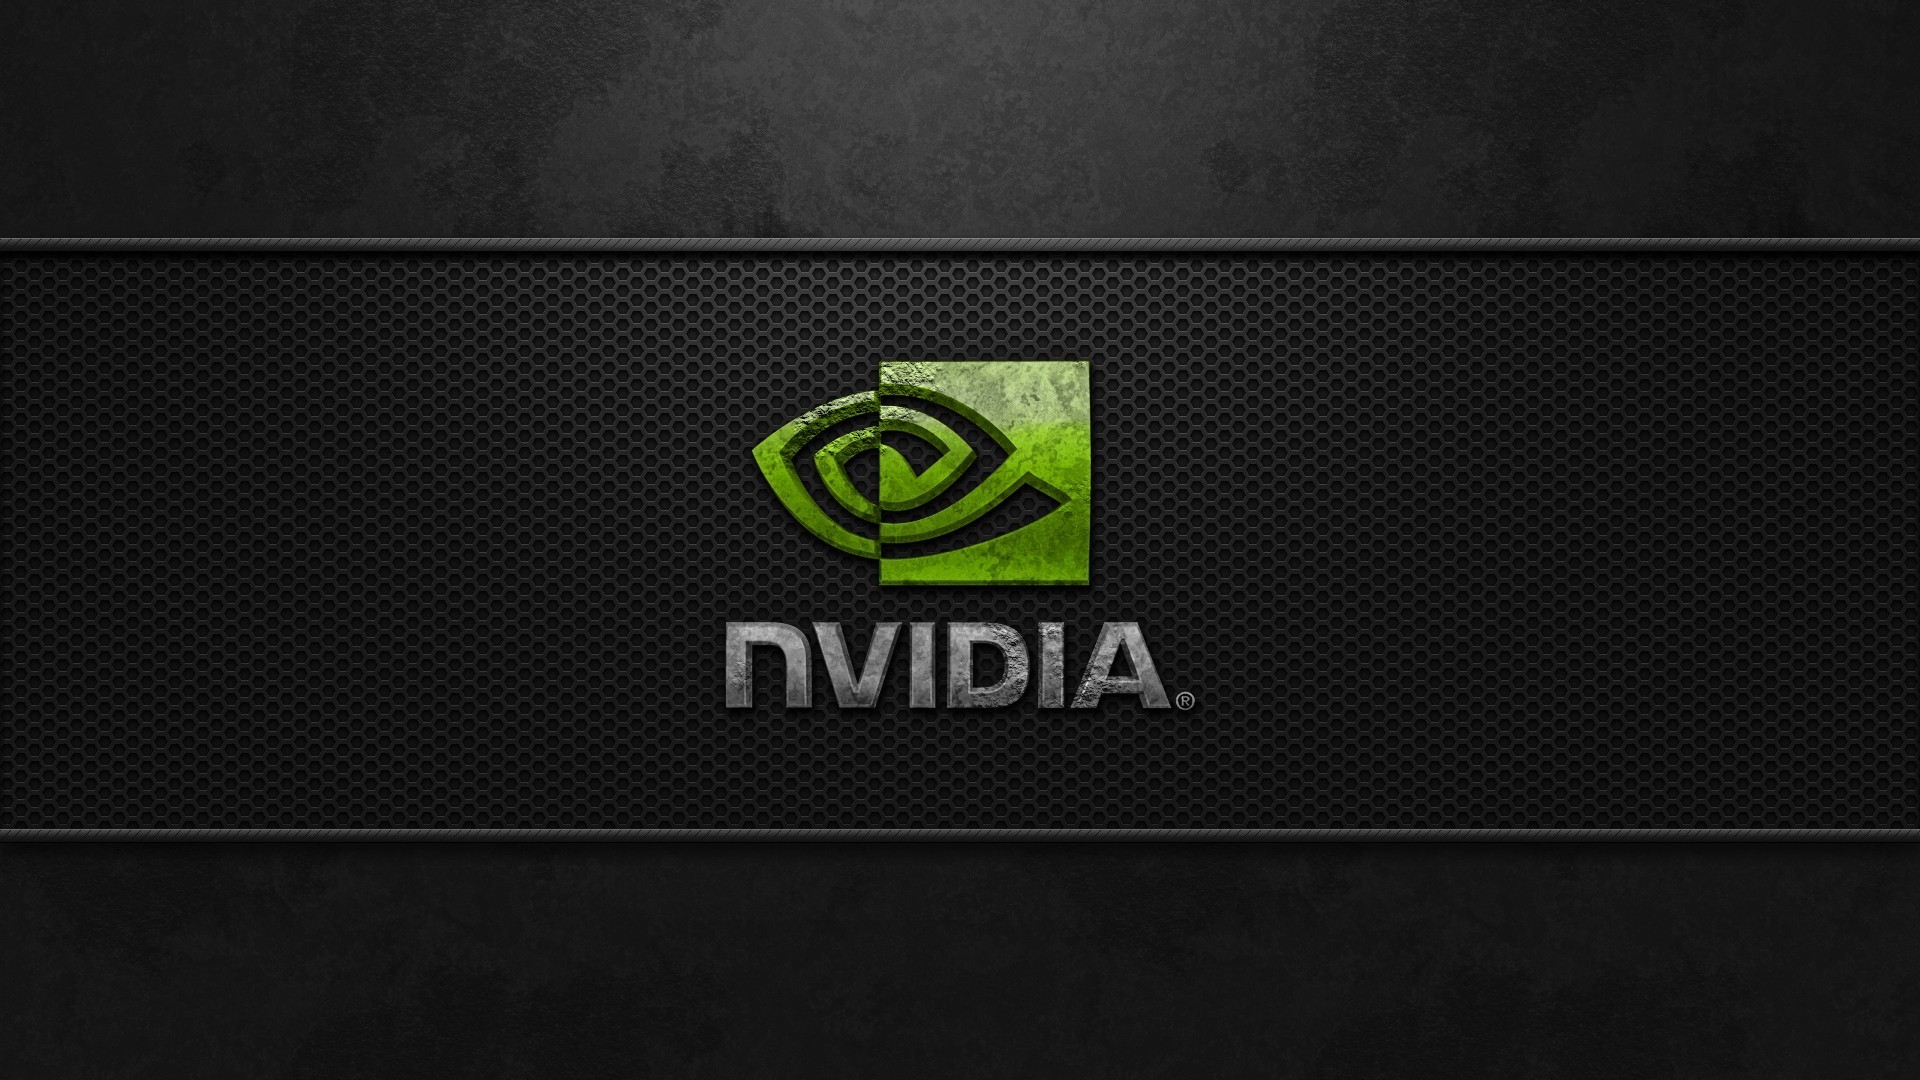 Nvidia Beta Out Now For Linux Bsd And Solaris With Opengl